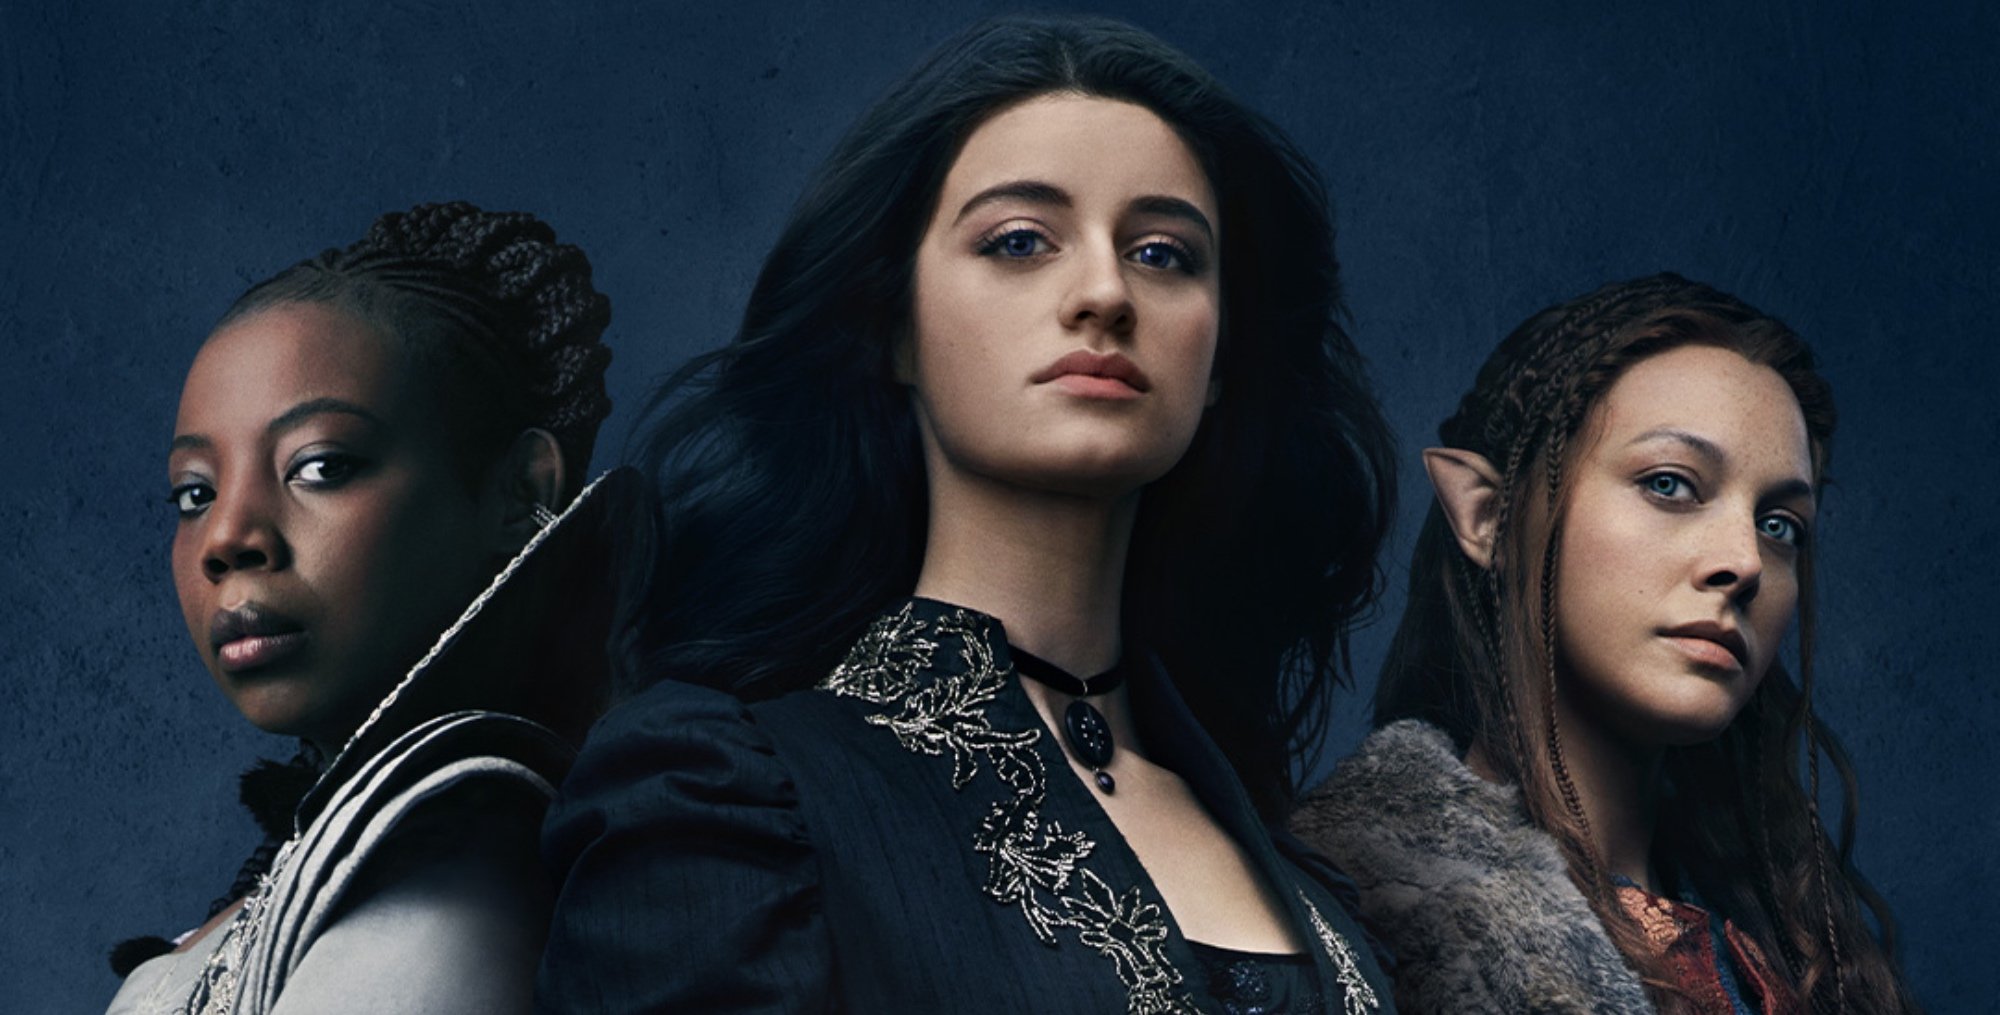 Fringilla, Yennefer and Francesca in 'The Witcher' Season 2 in relation to Hissrich wearing grey and blue gowns.